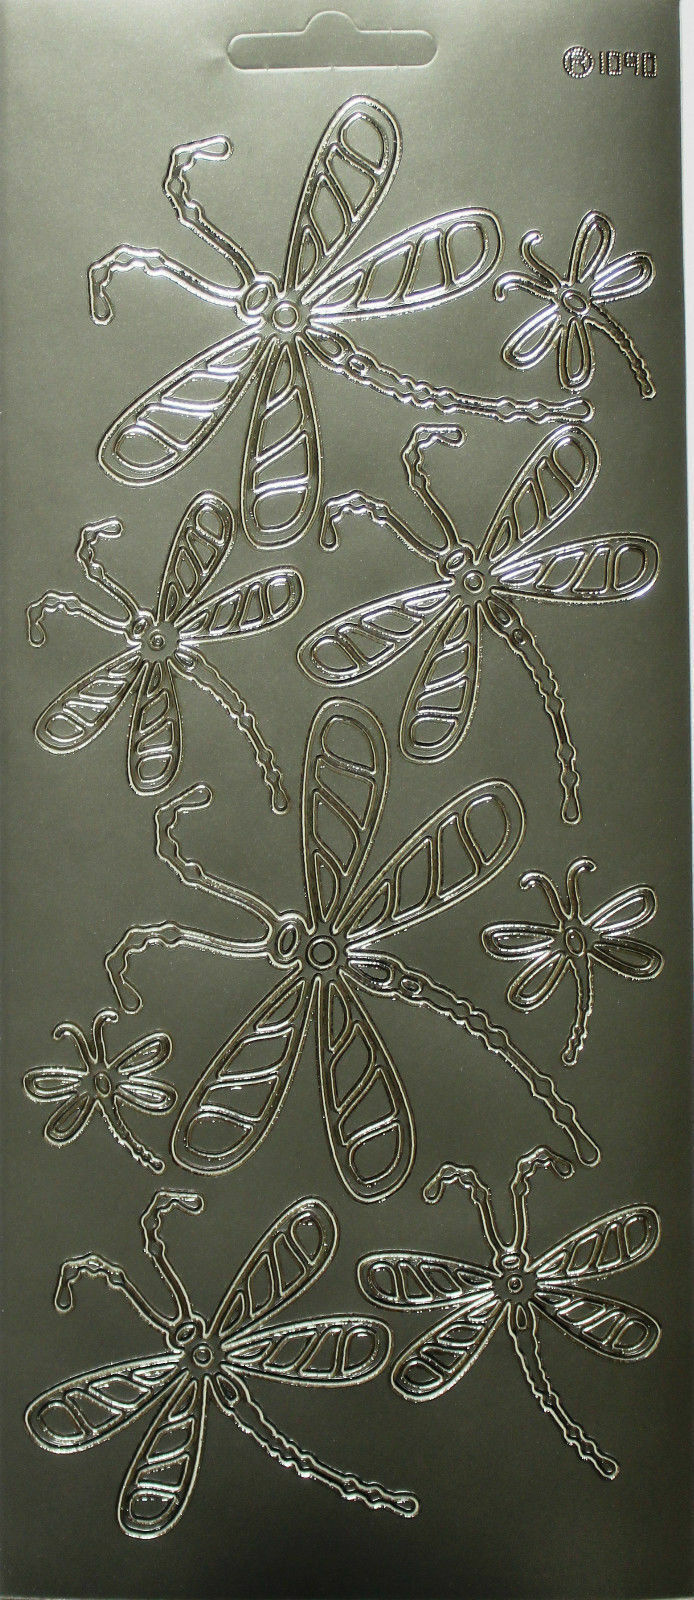 Assorted Dragonfly Peel Off Outline Sticker Sheet For Card Making Craft